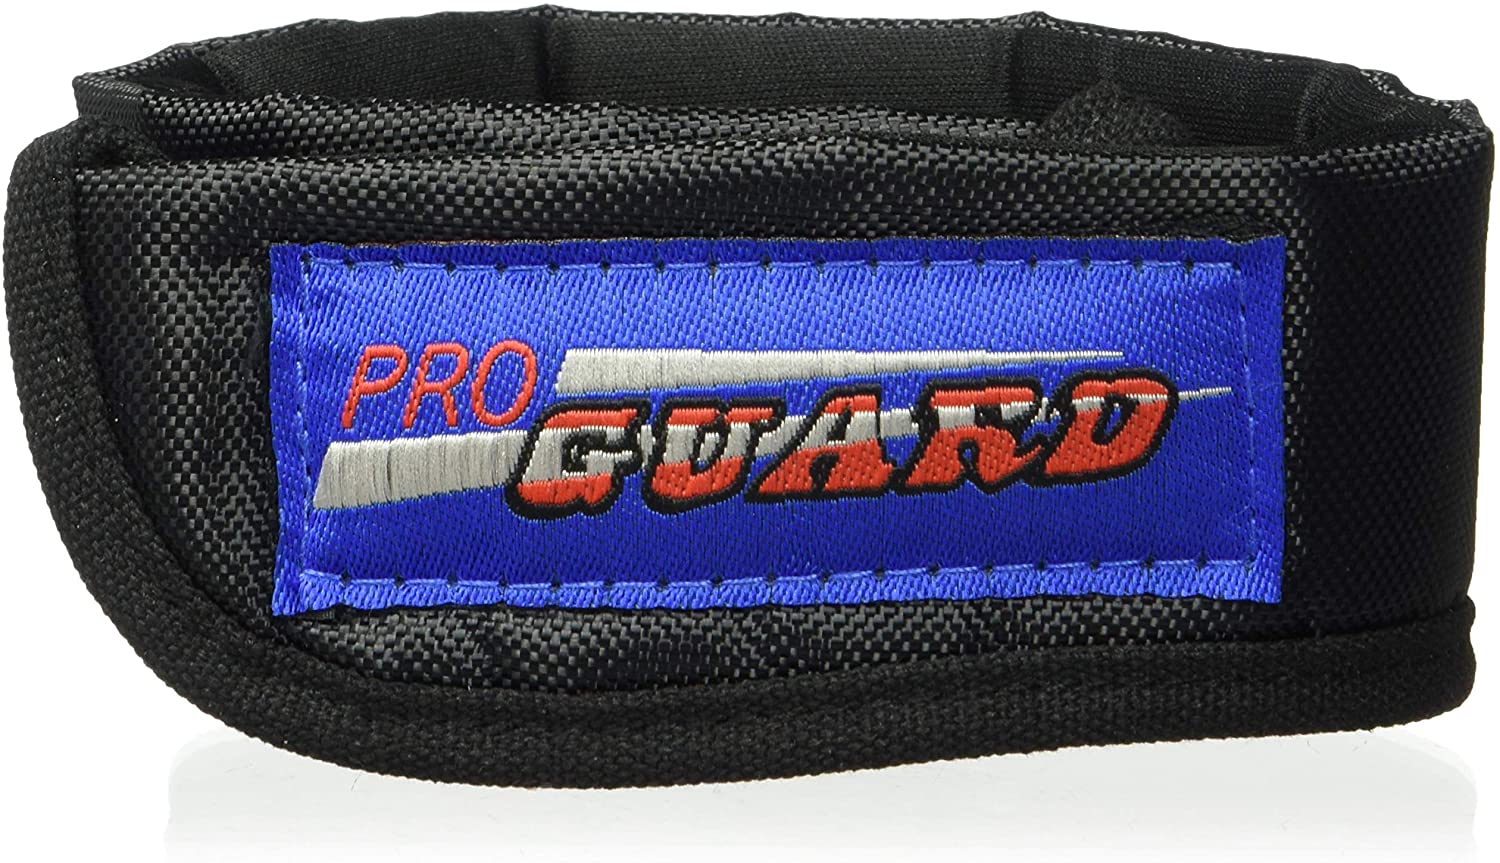 Proguard Youth Neck Guard